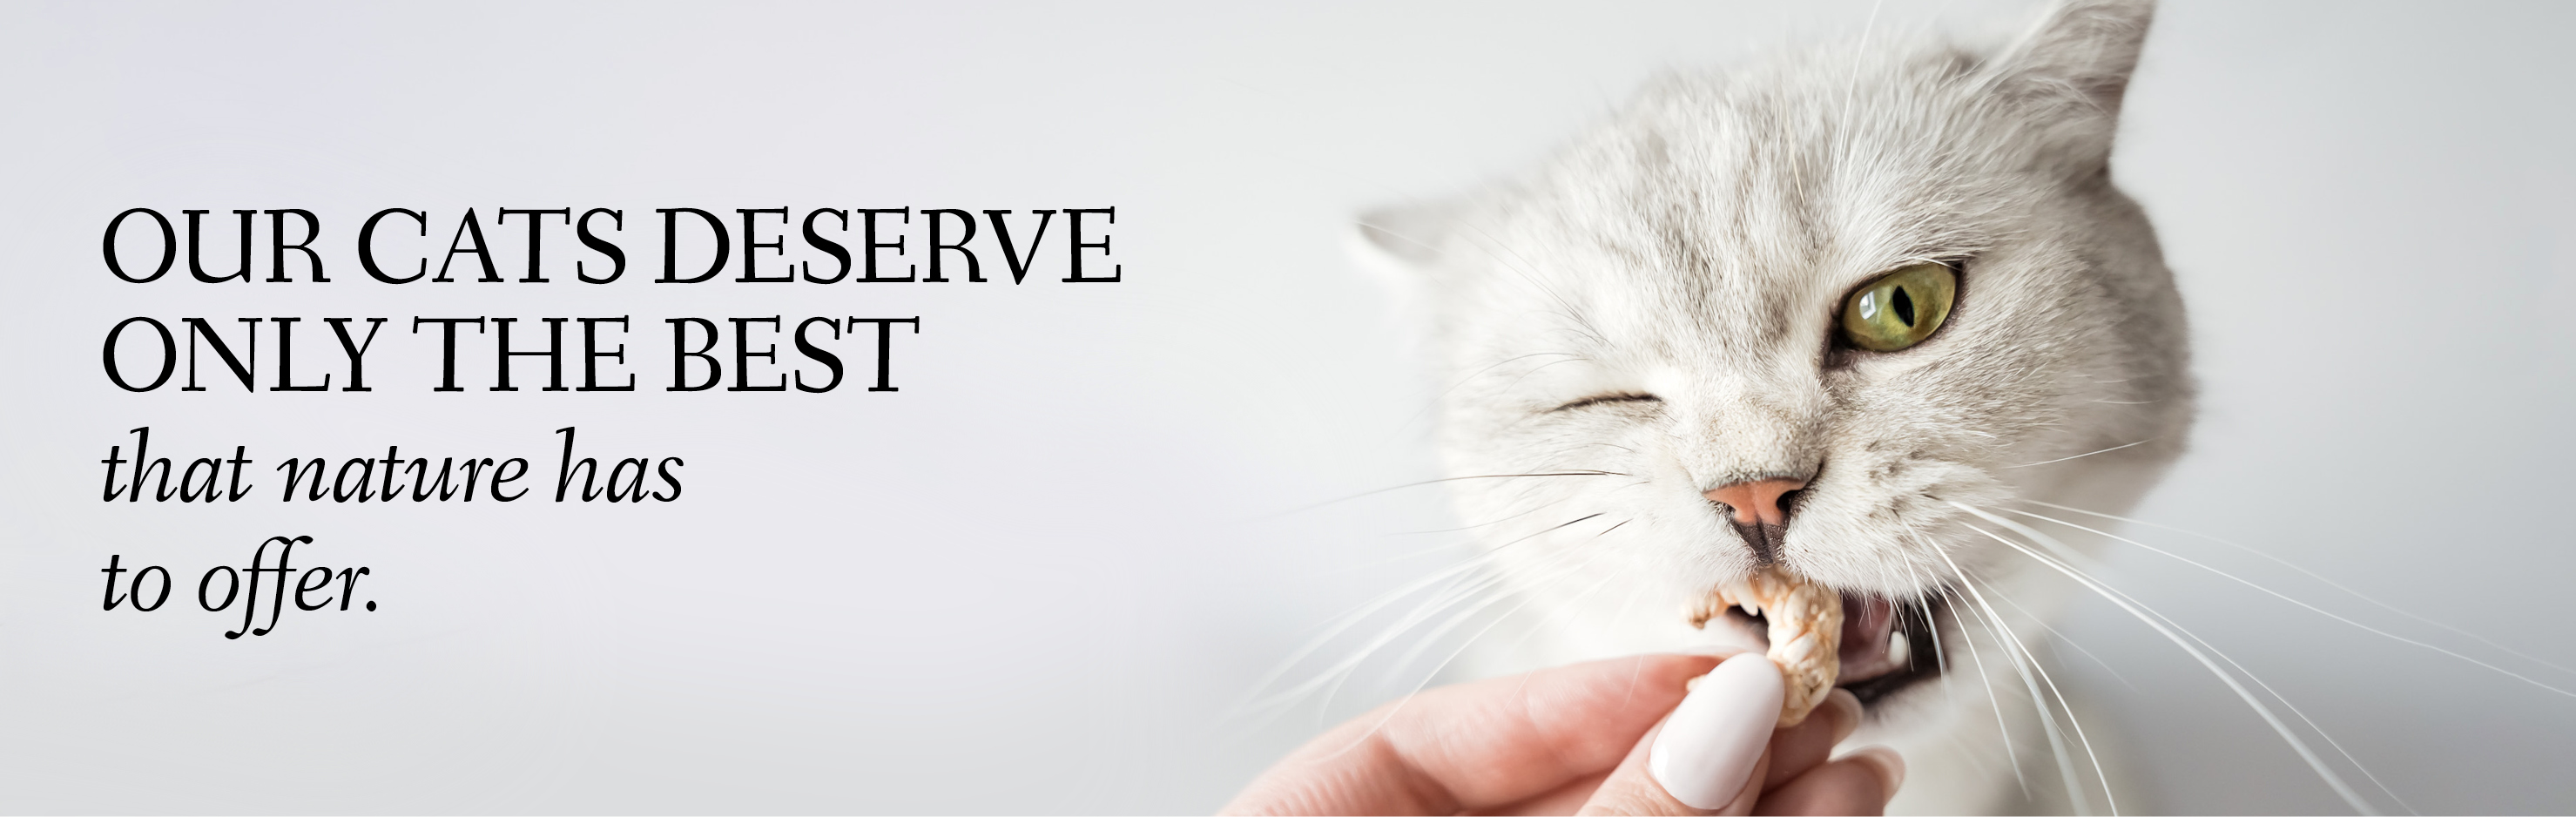 Banner with a cat nibbling on a shrimp with the text: Our cats deserve only the best that nature has to offer.